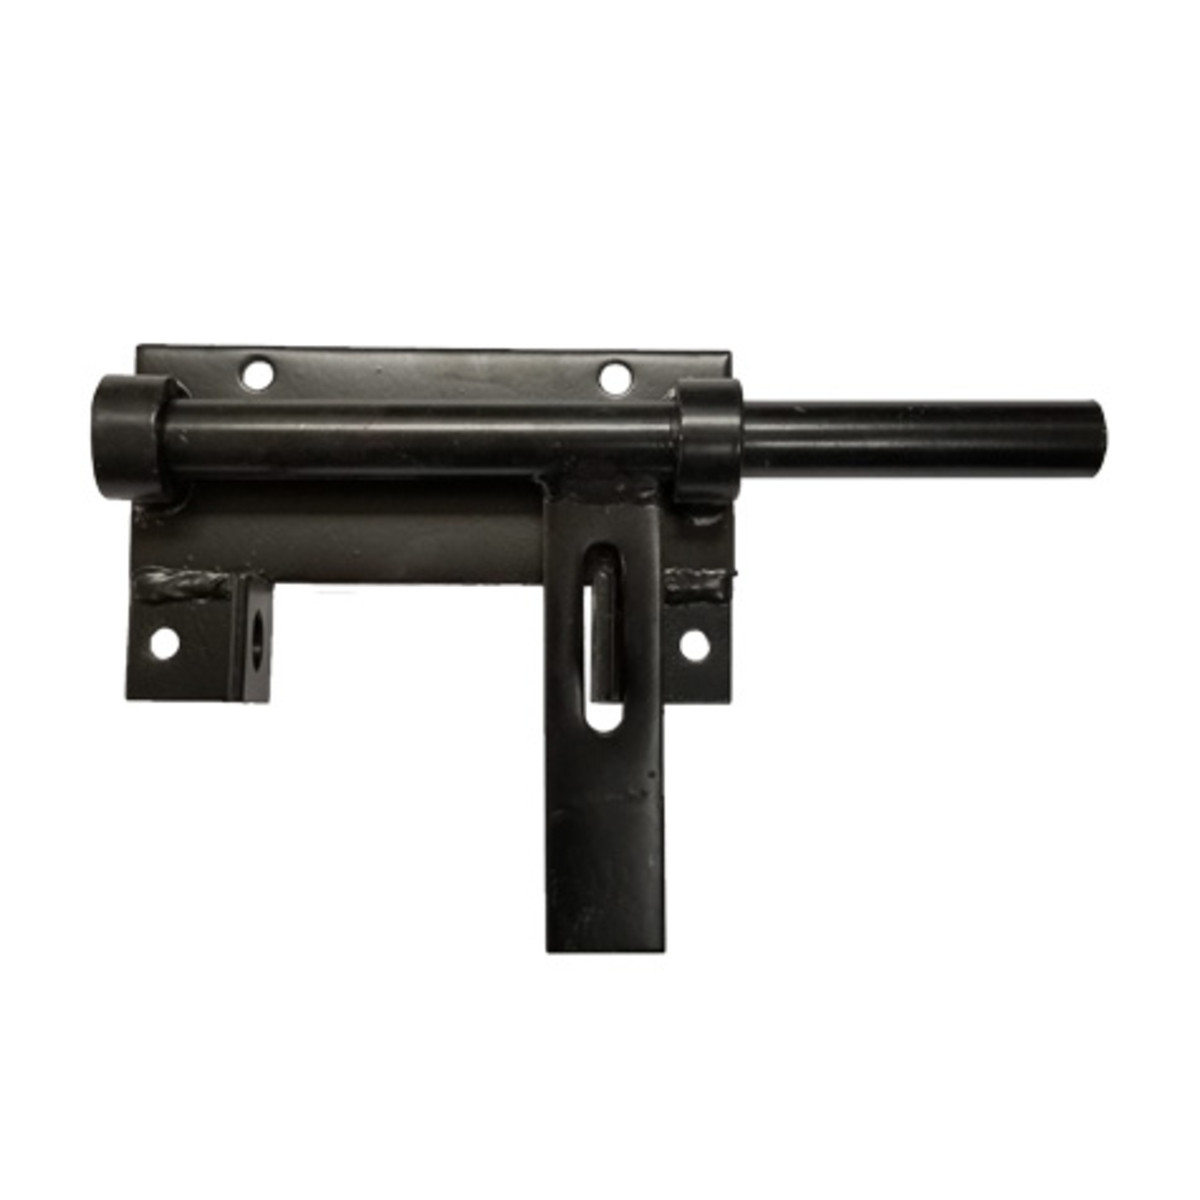 Heavy Duty Slide Bolt Gate Latch Neds Pipe And Steel